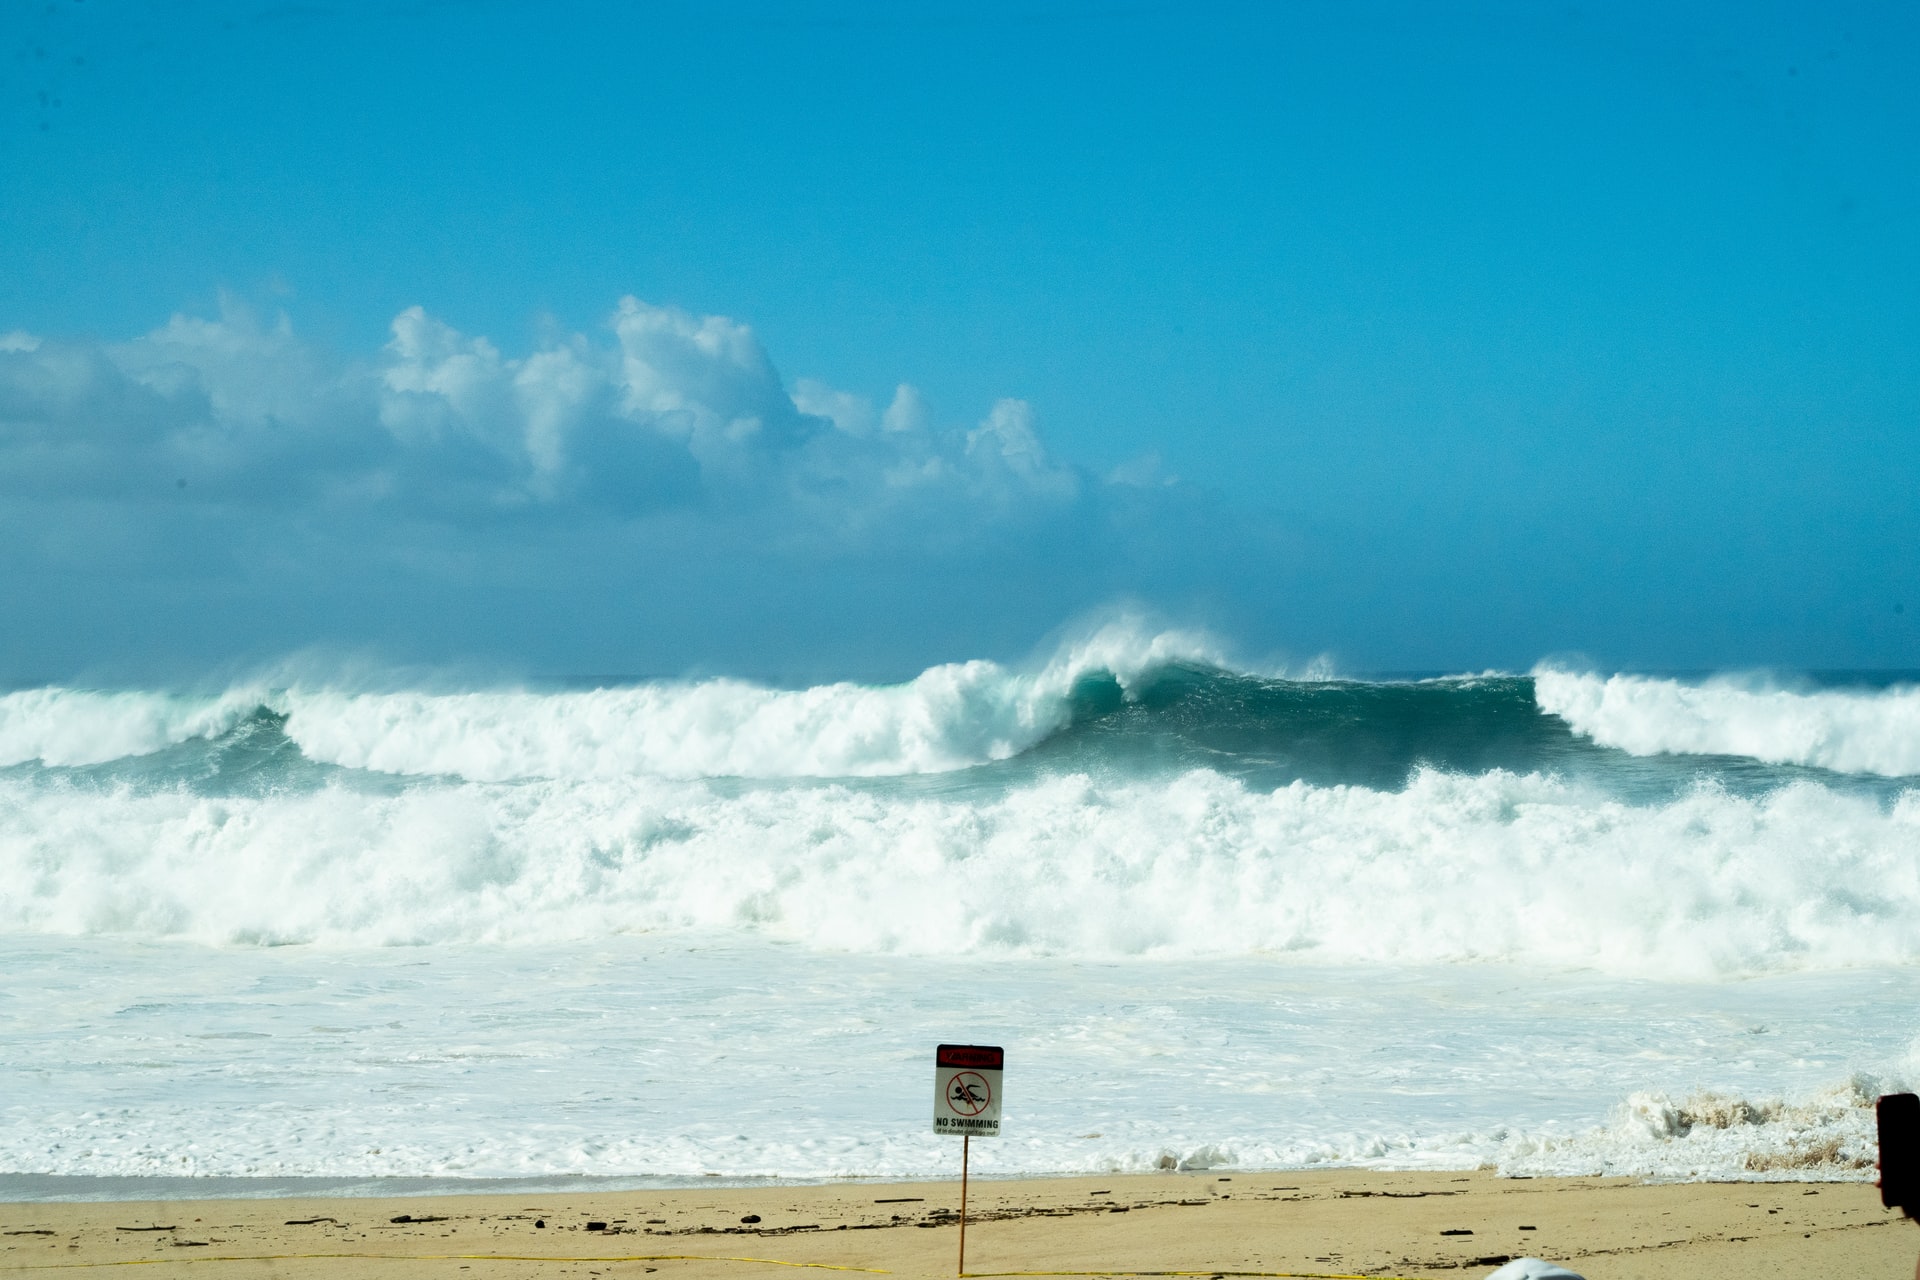 The West Coast is under a tsunami advisory. Here’s what that means.